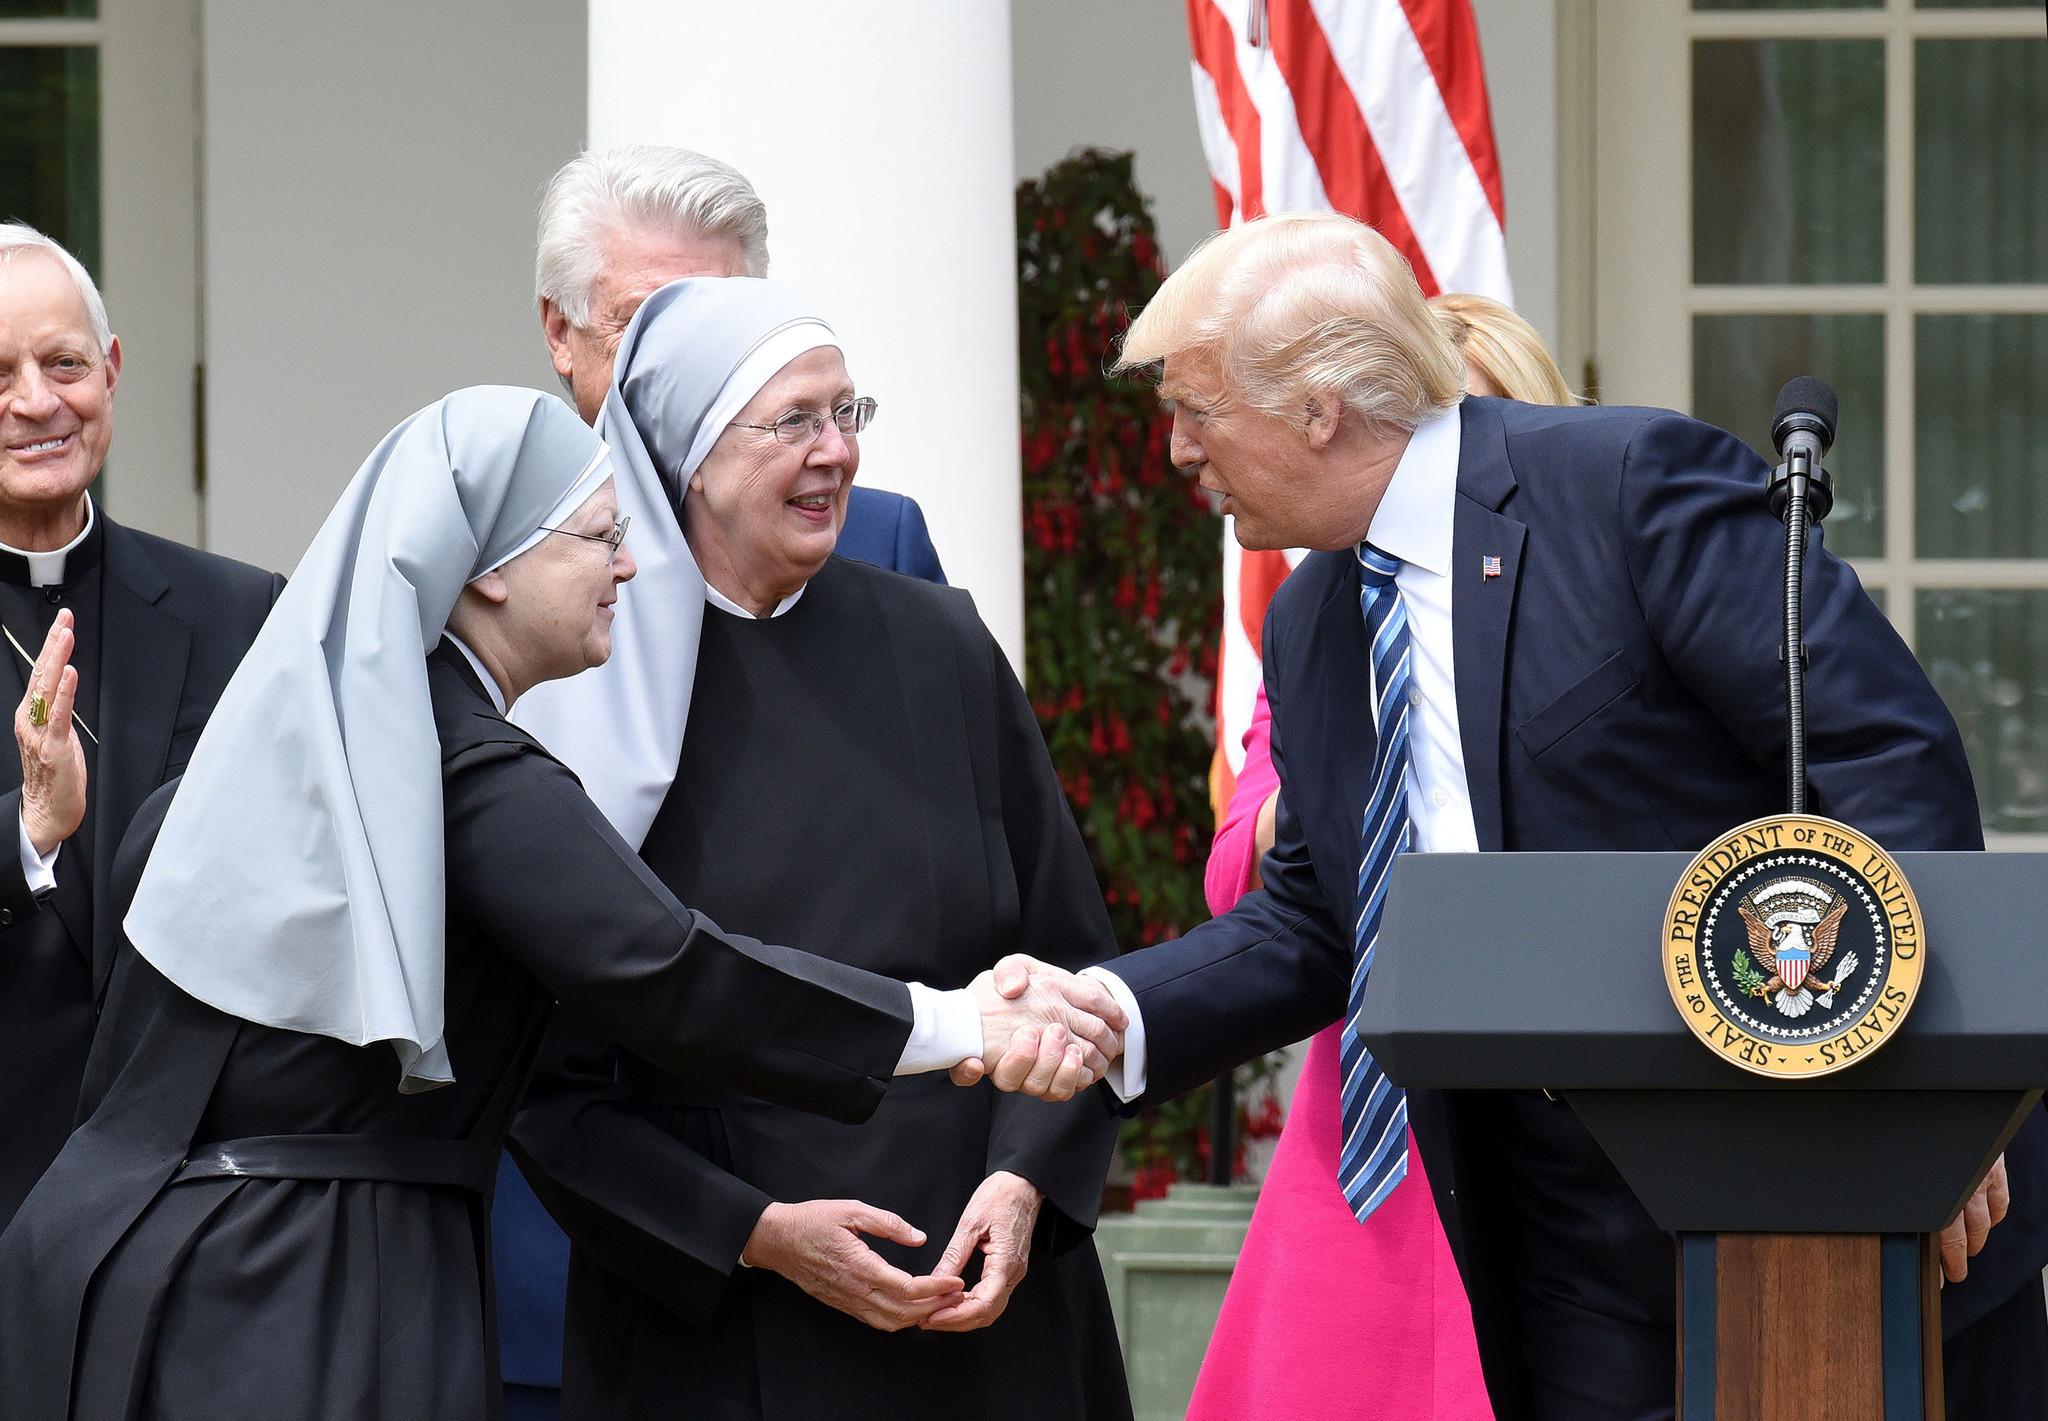 Little Sisters of the Poor approve Trump order on religion - Baltimore Sun2048 x 1421